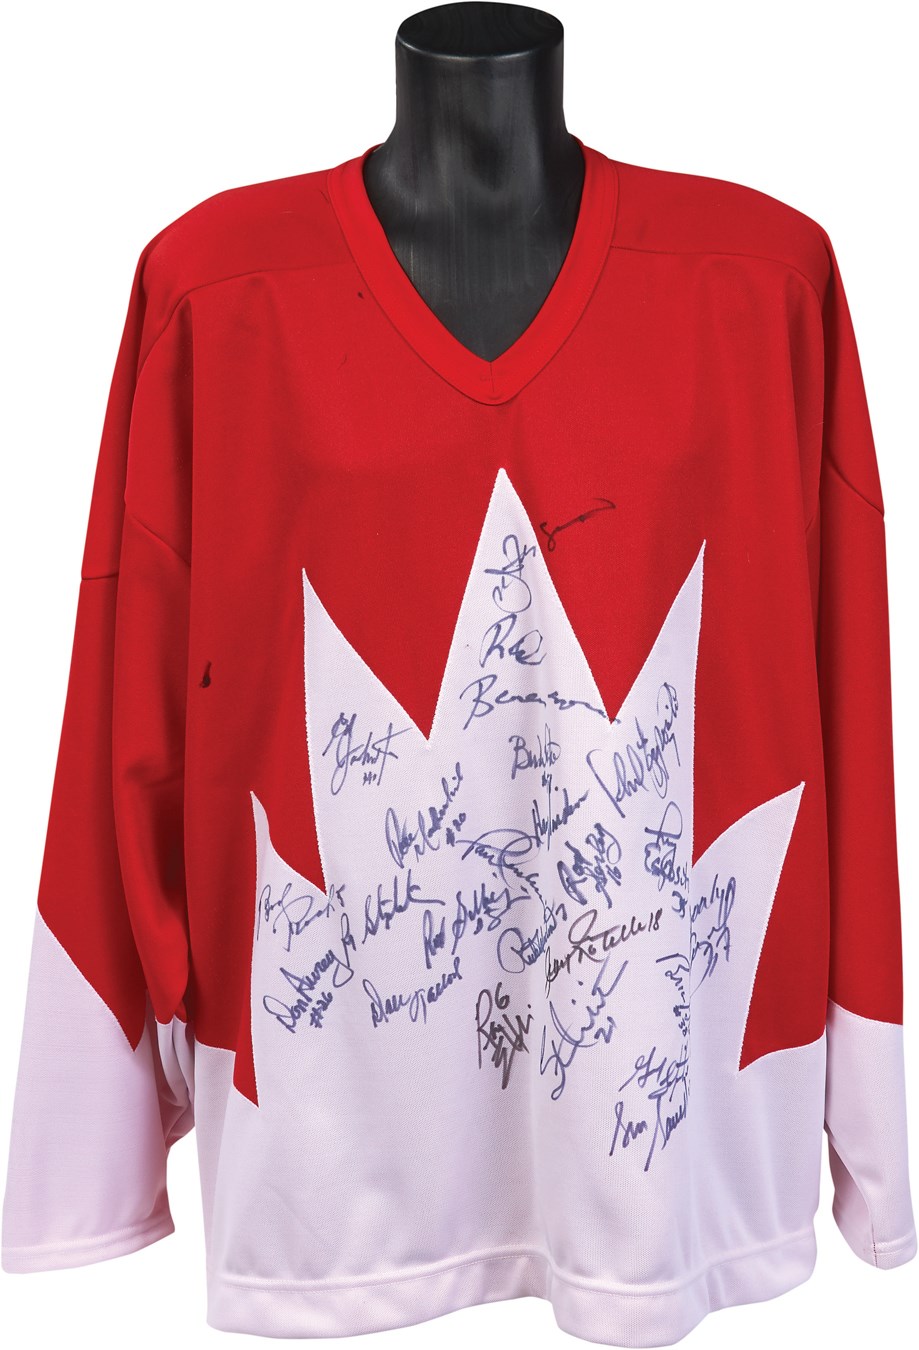 The Great Jean Ratelle Hockey Collection - 1972 Summit Series Team Canada Signed Jersey